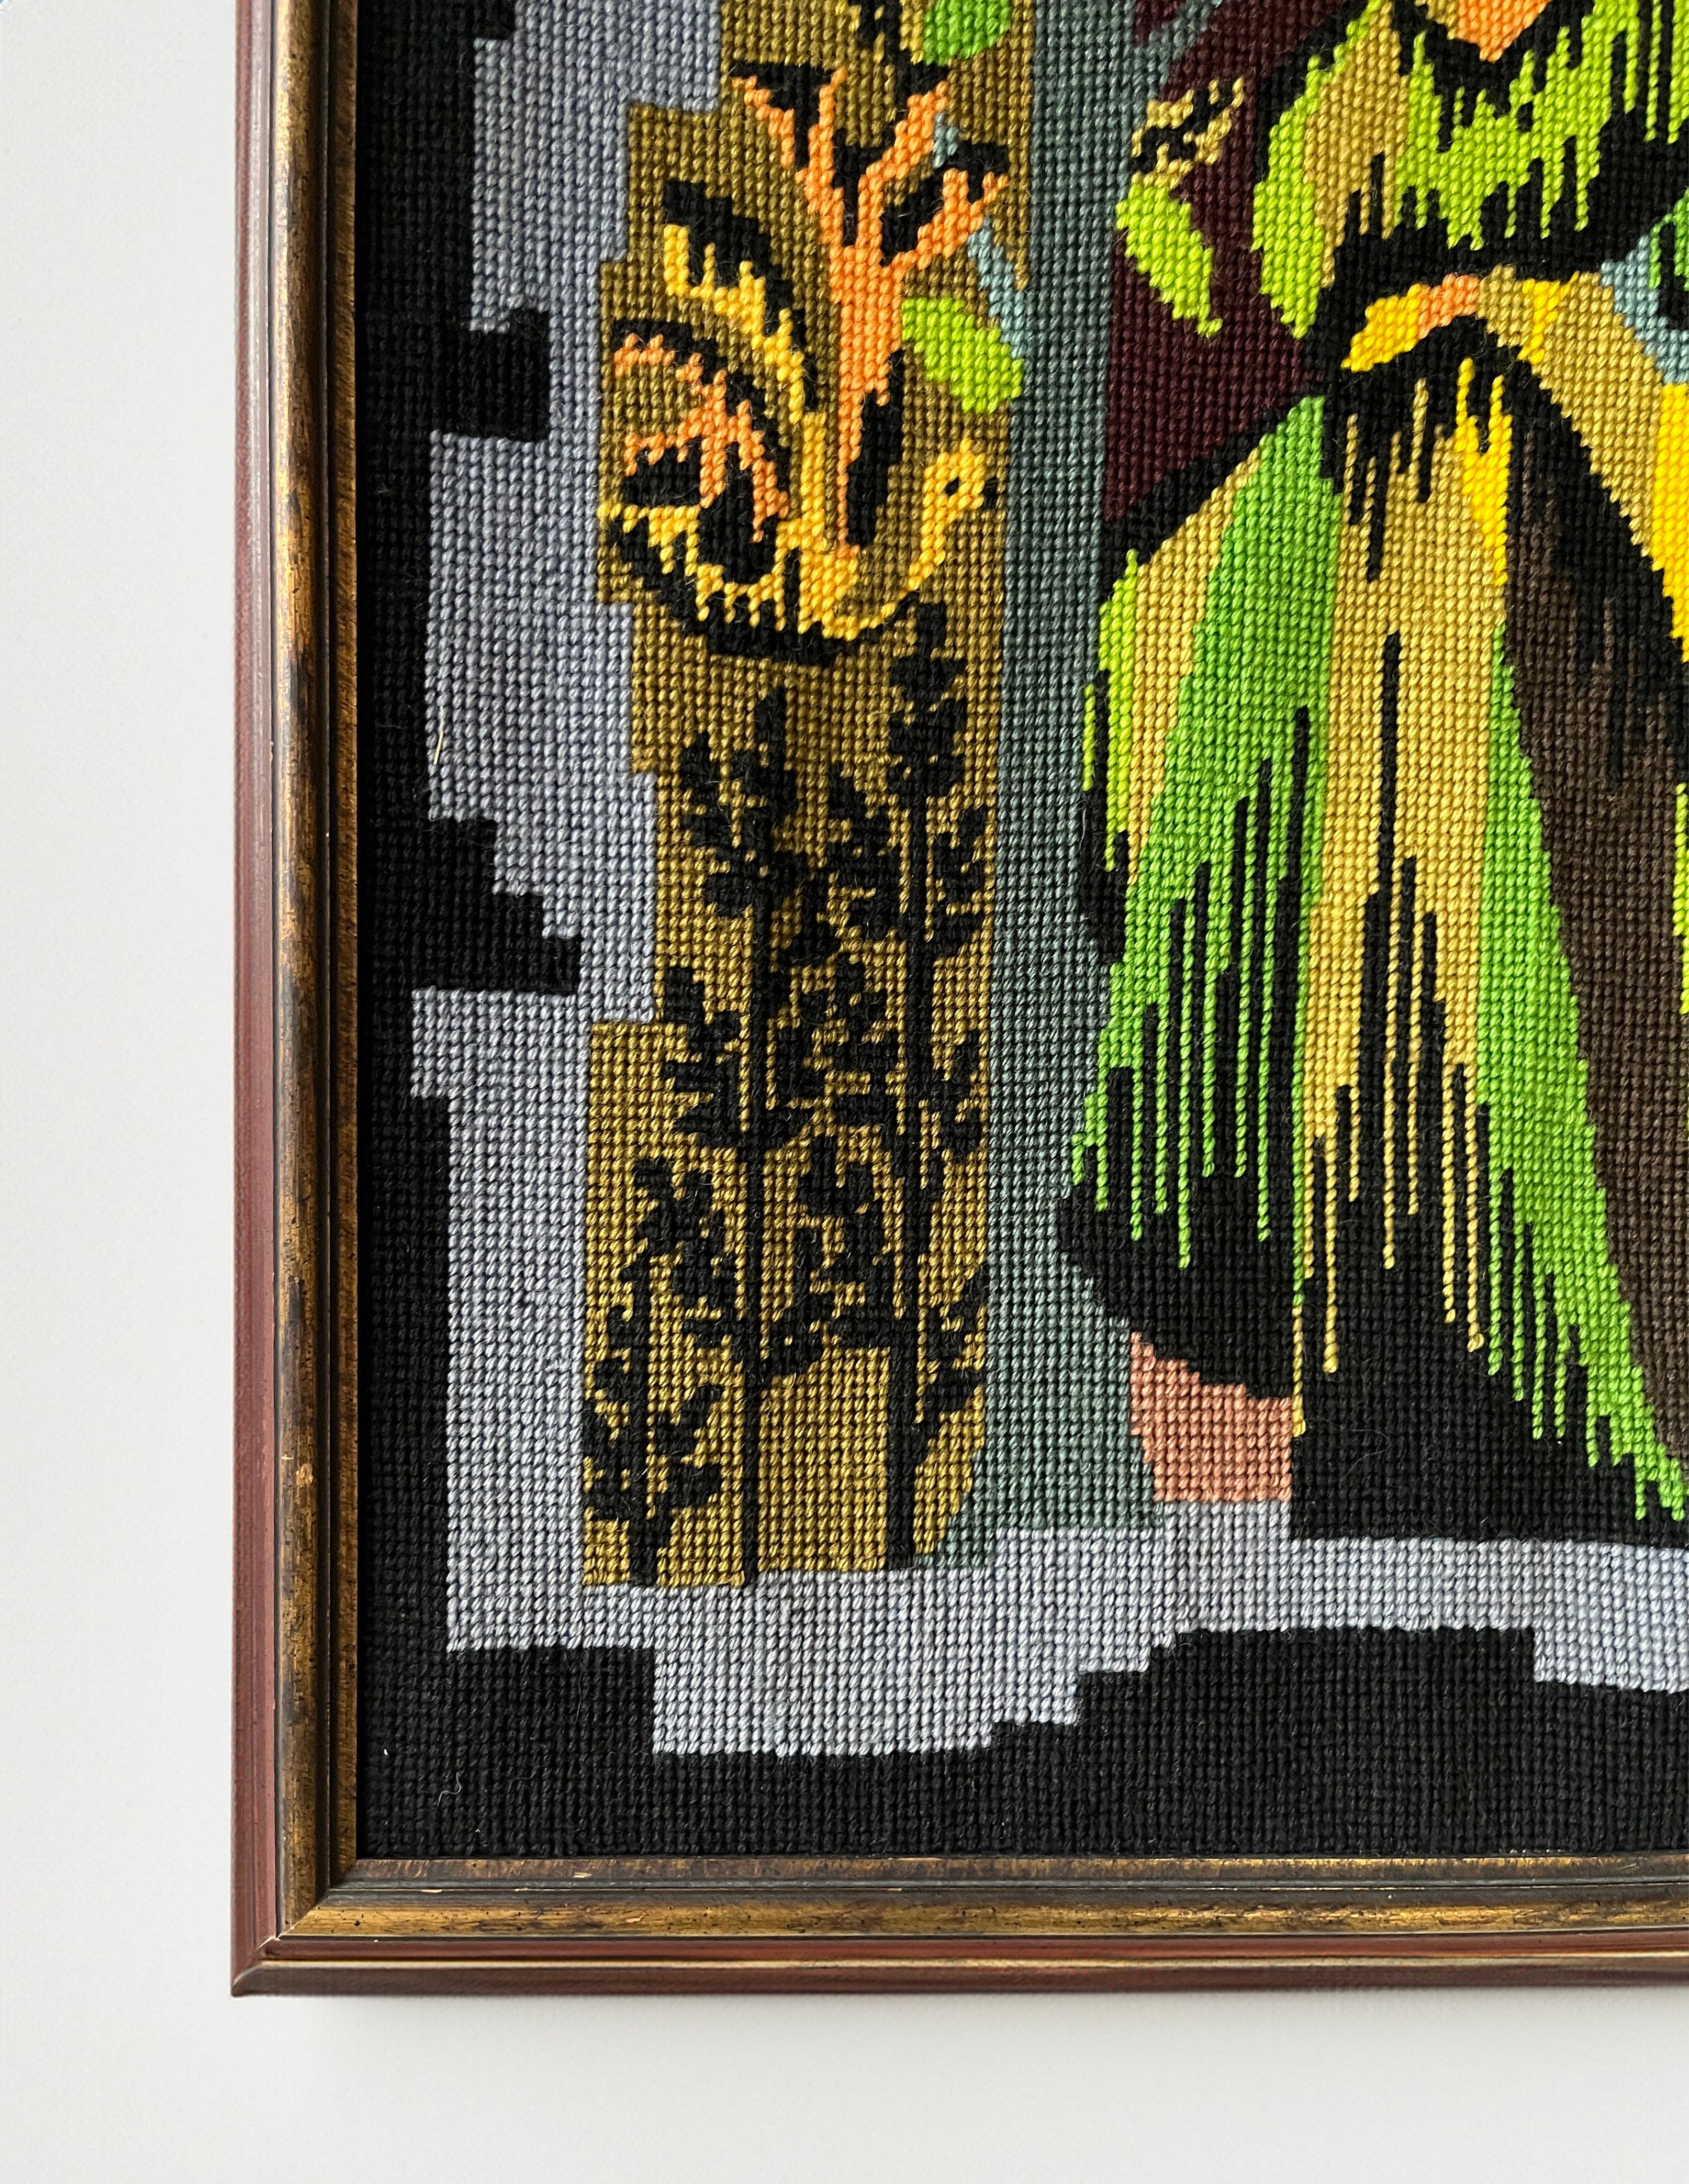 Framed, vibrant and hand-stitched needlepoint featuring the four seasons -- spring, summer, winter and fall -- executed with tapestry wool. The attention to detail is evident with the intricate, elaborate artisan needlework. From a French kit titled